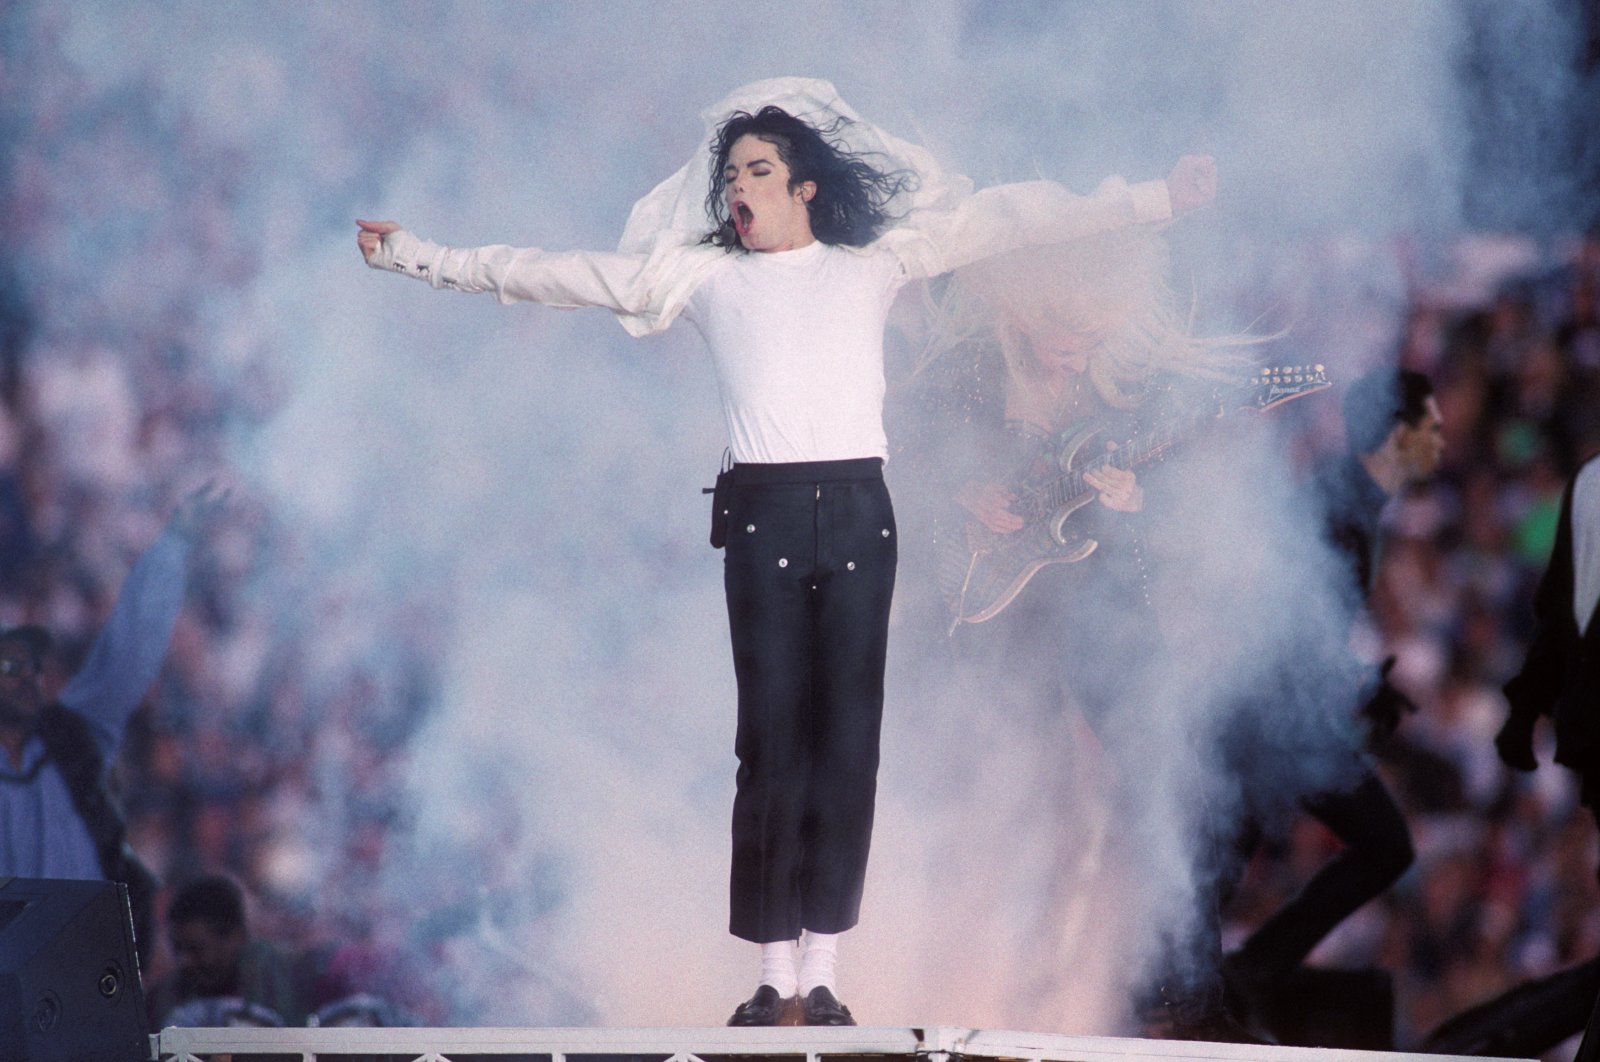 Michael Jackson performs at the Super Bowl XXVII Halftime show at the Rose Bowl, Pasadena, California, U.S., Jan. 31, 1993. (Getty Images Photo)